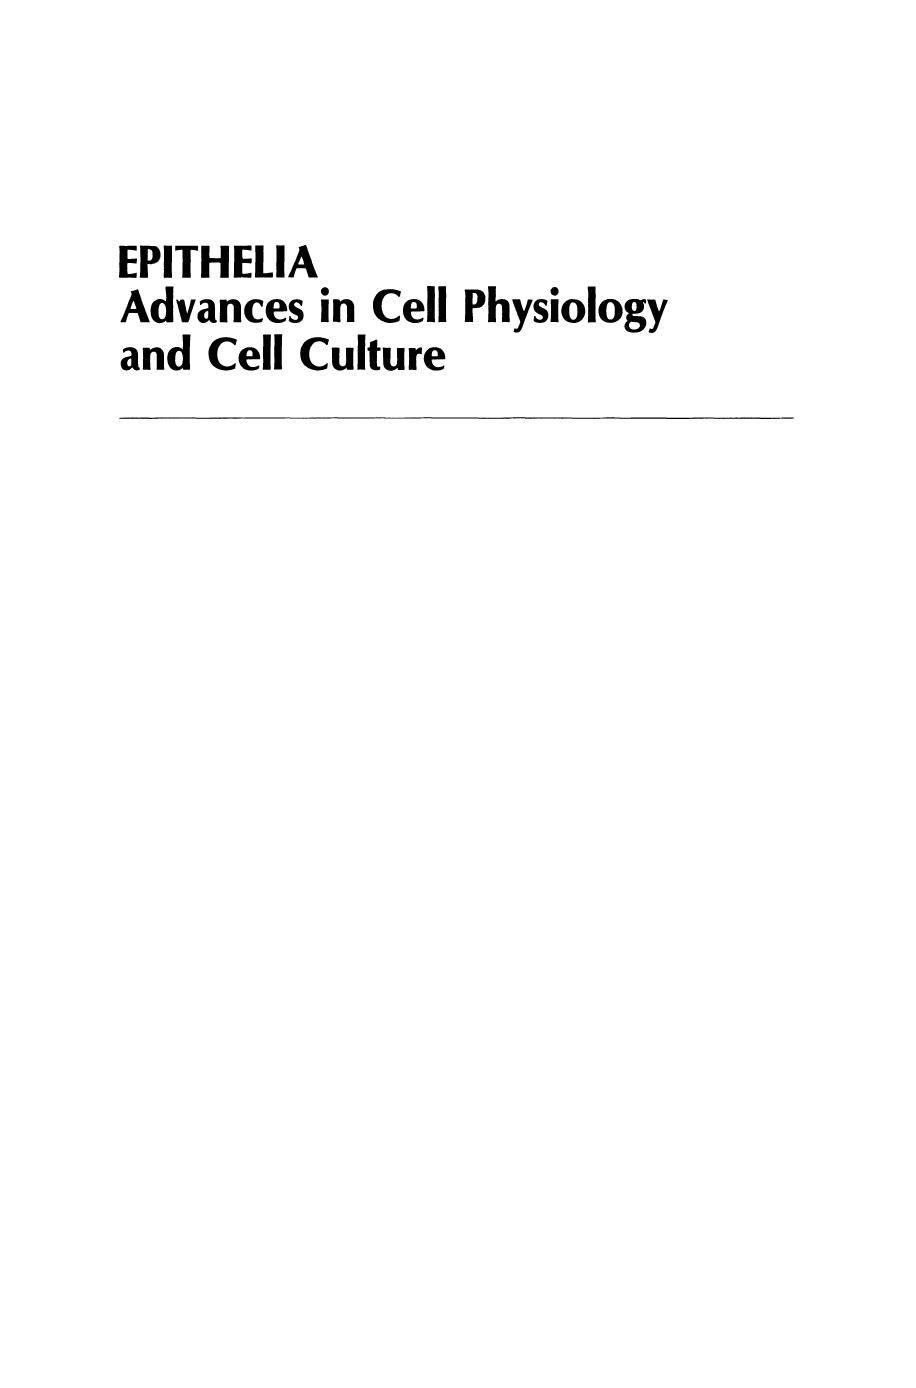 Epithelia  Advances in Cell Physiology and Cell Culture 1990